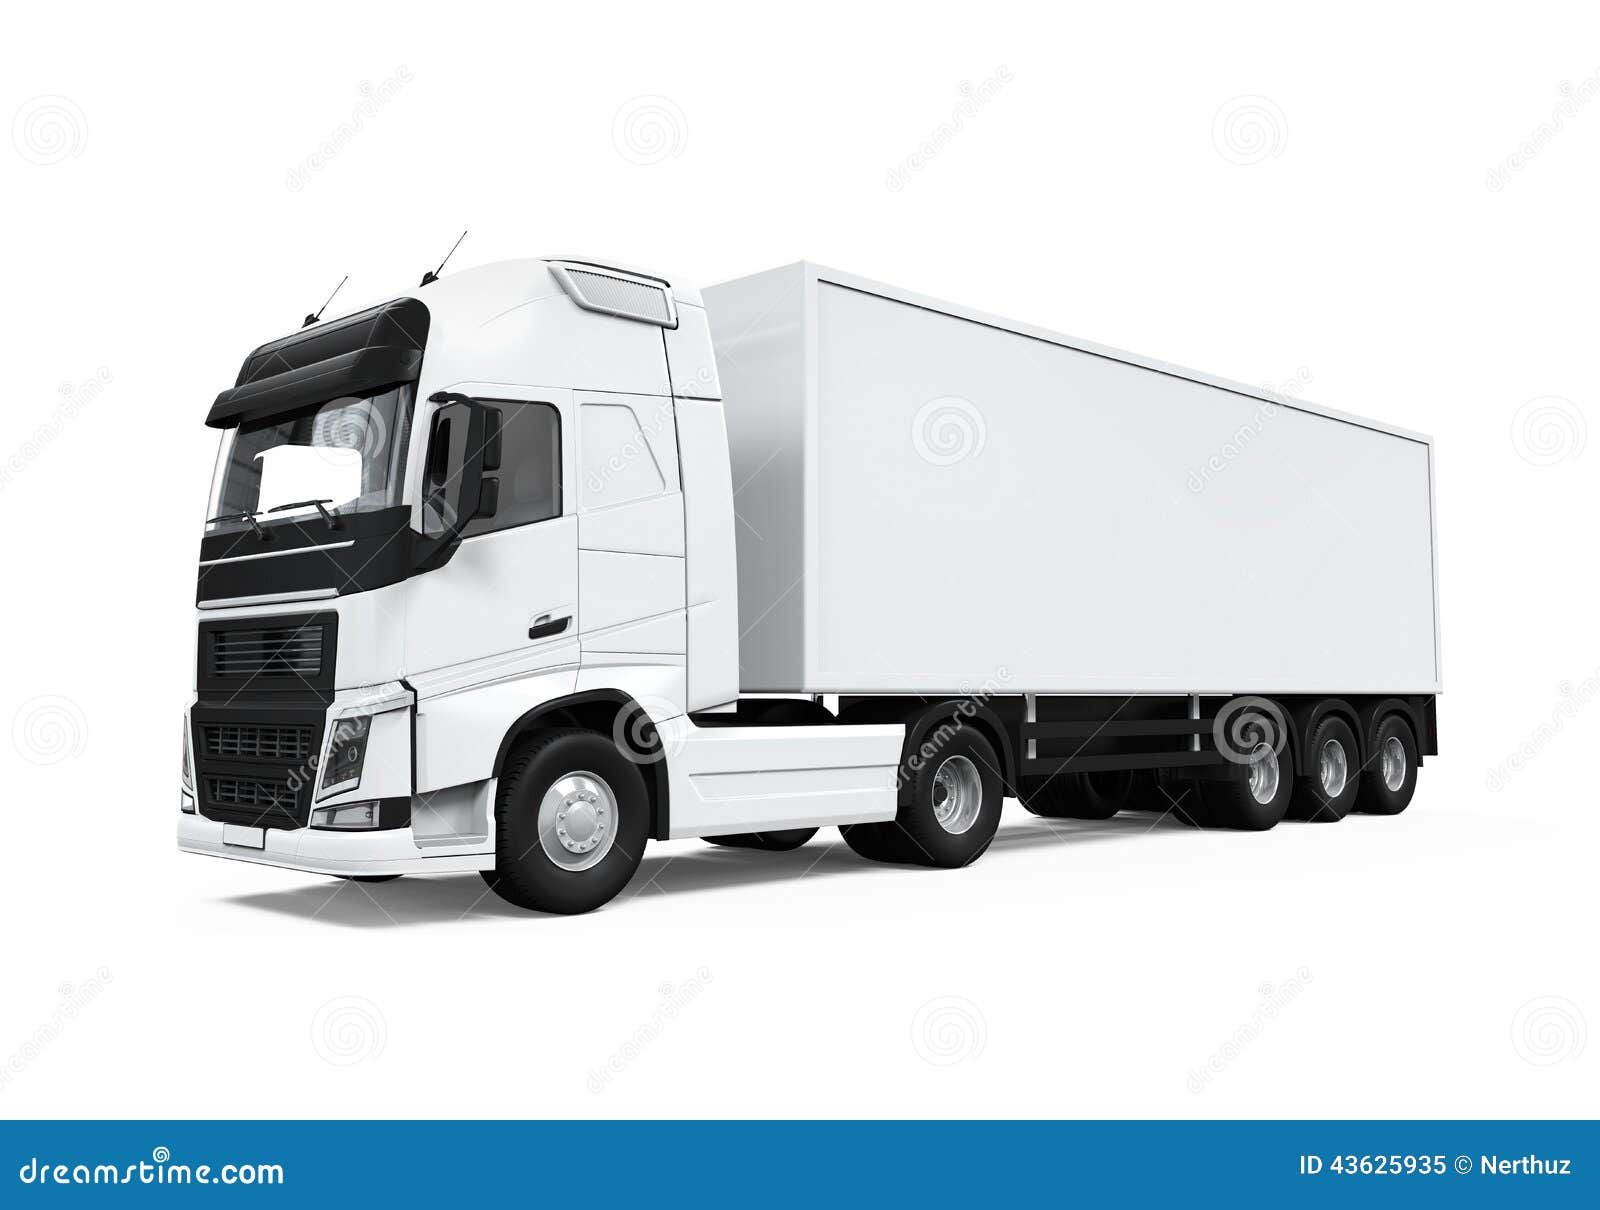 Cargo Delivery Truck Stock Illustration  Image: 43625935